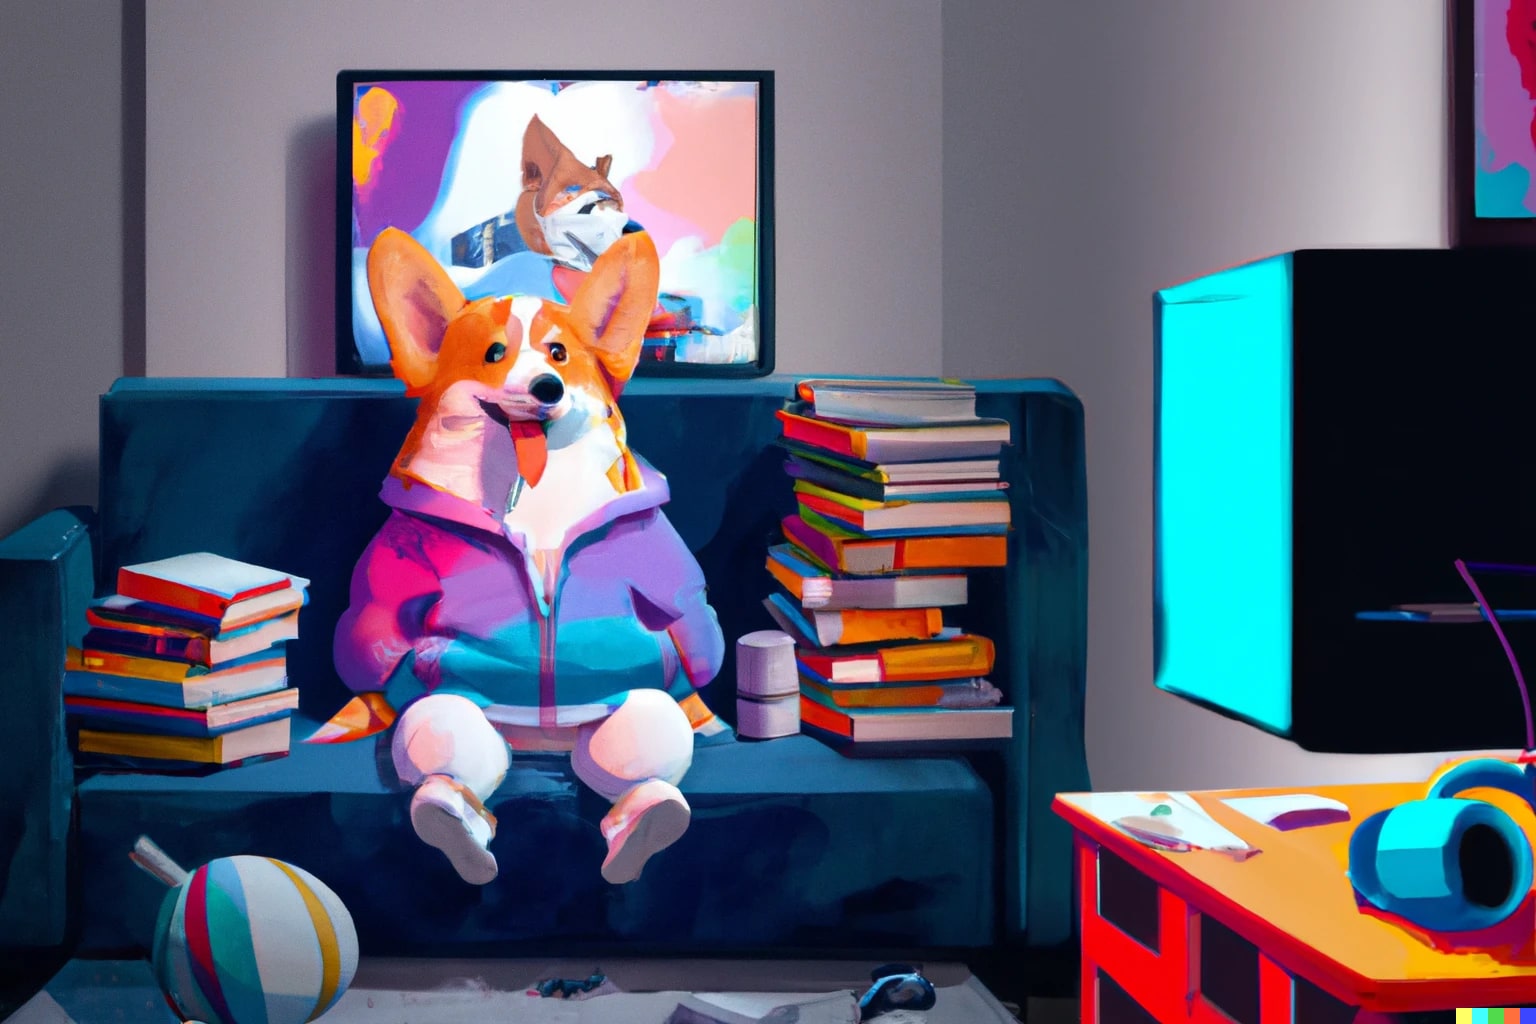 A cartoon corgi sitting on the couch surrounded by books, watching TV.